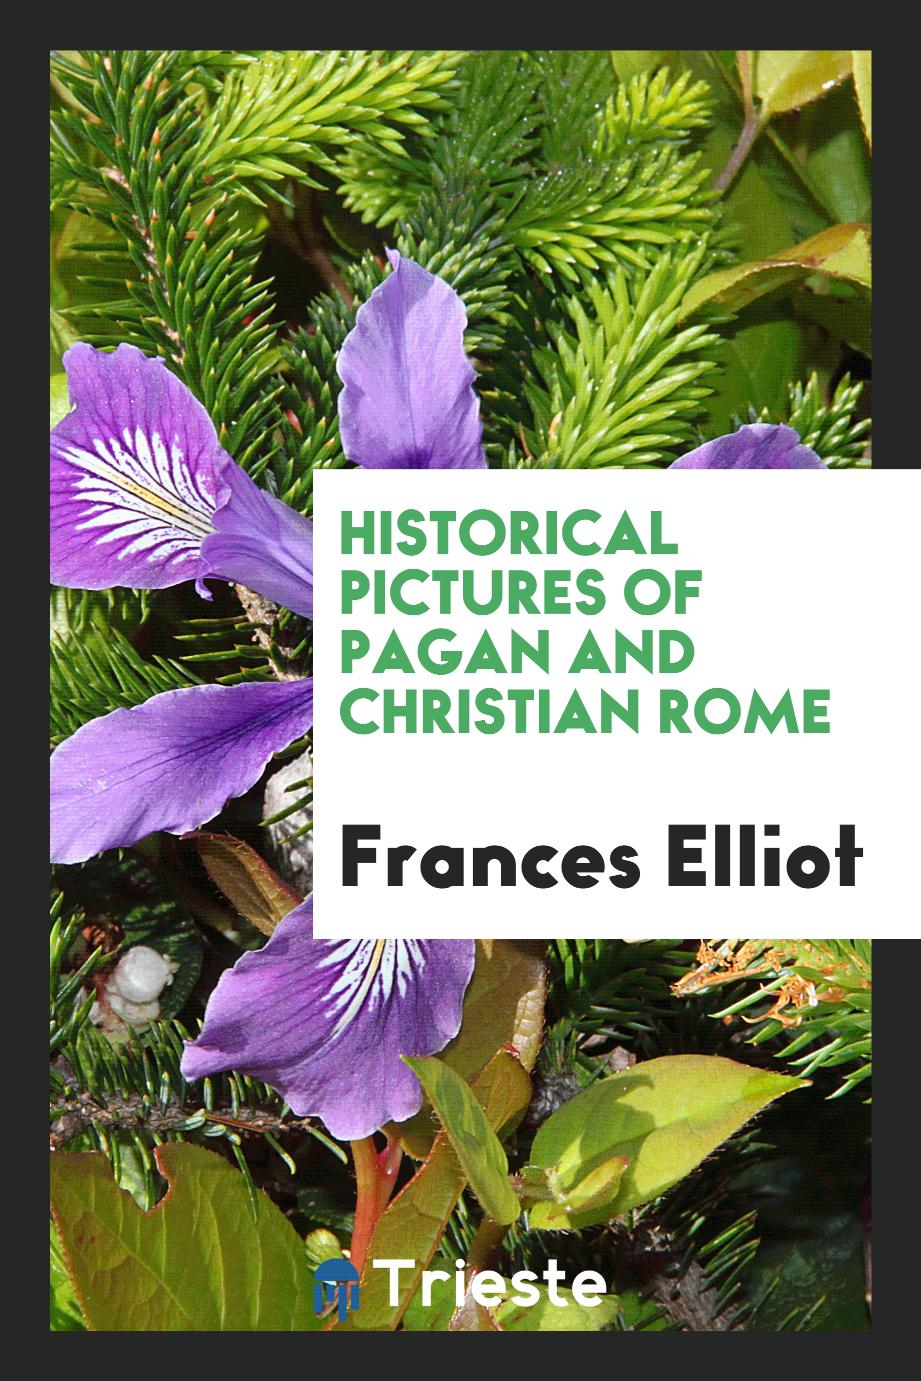 Historical Pictures of Pagan and Christian Rome